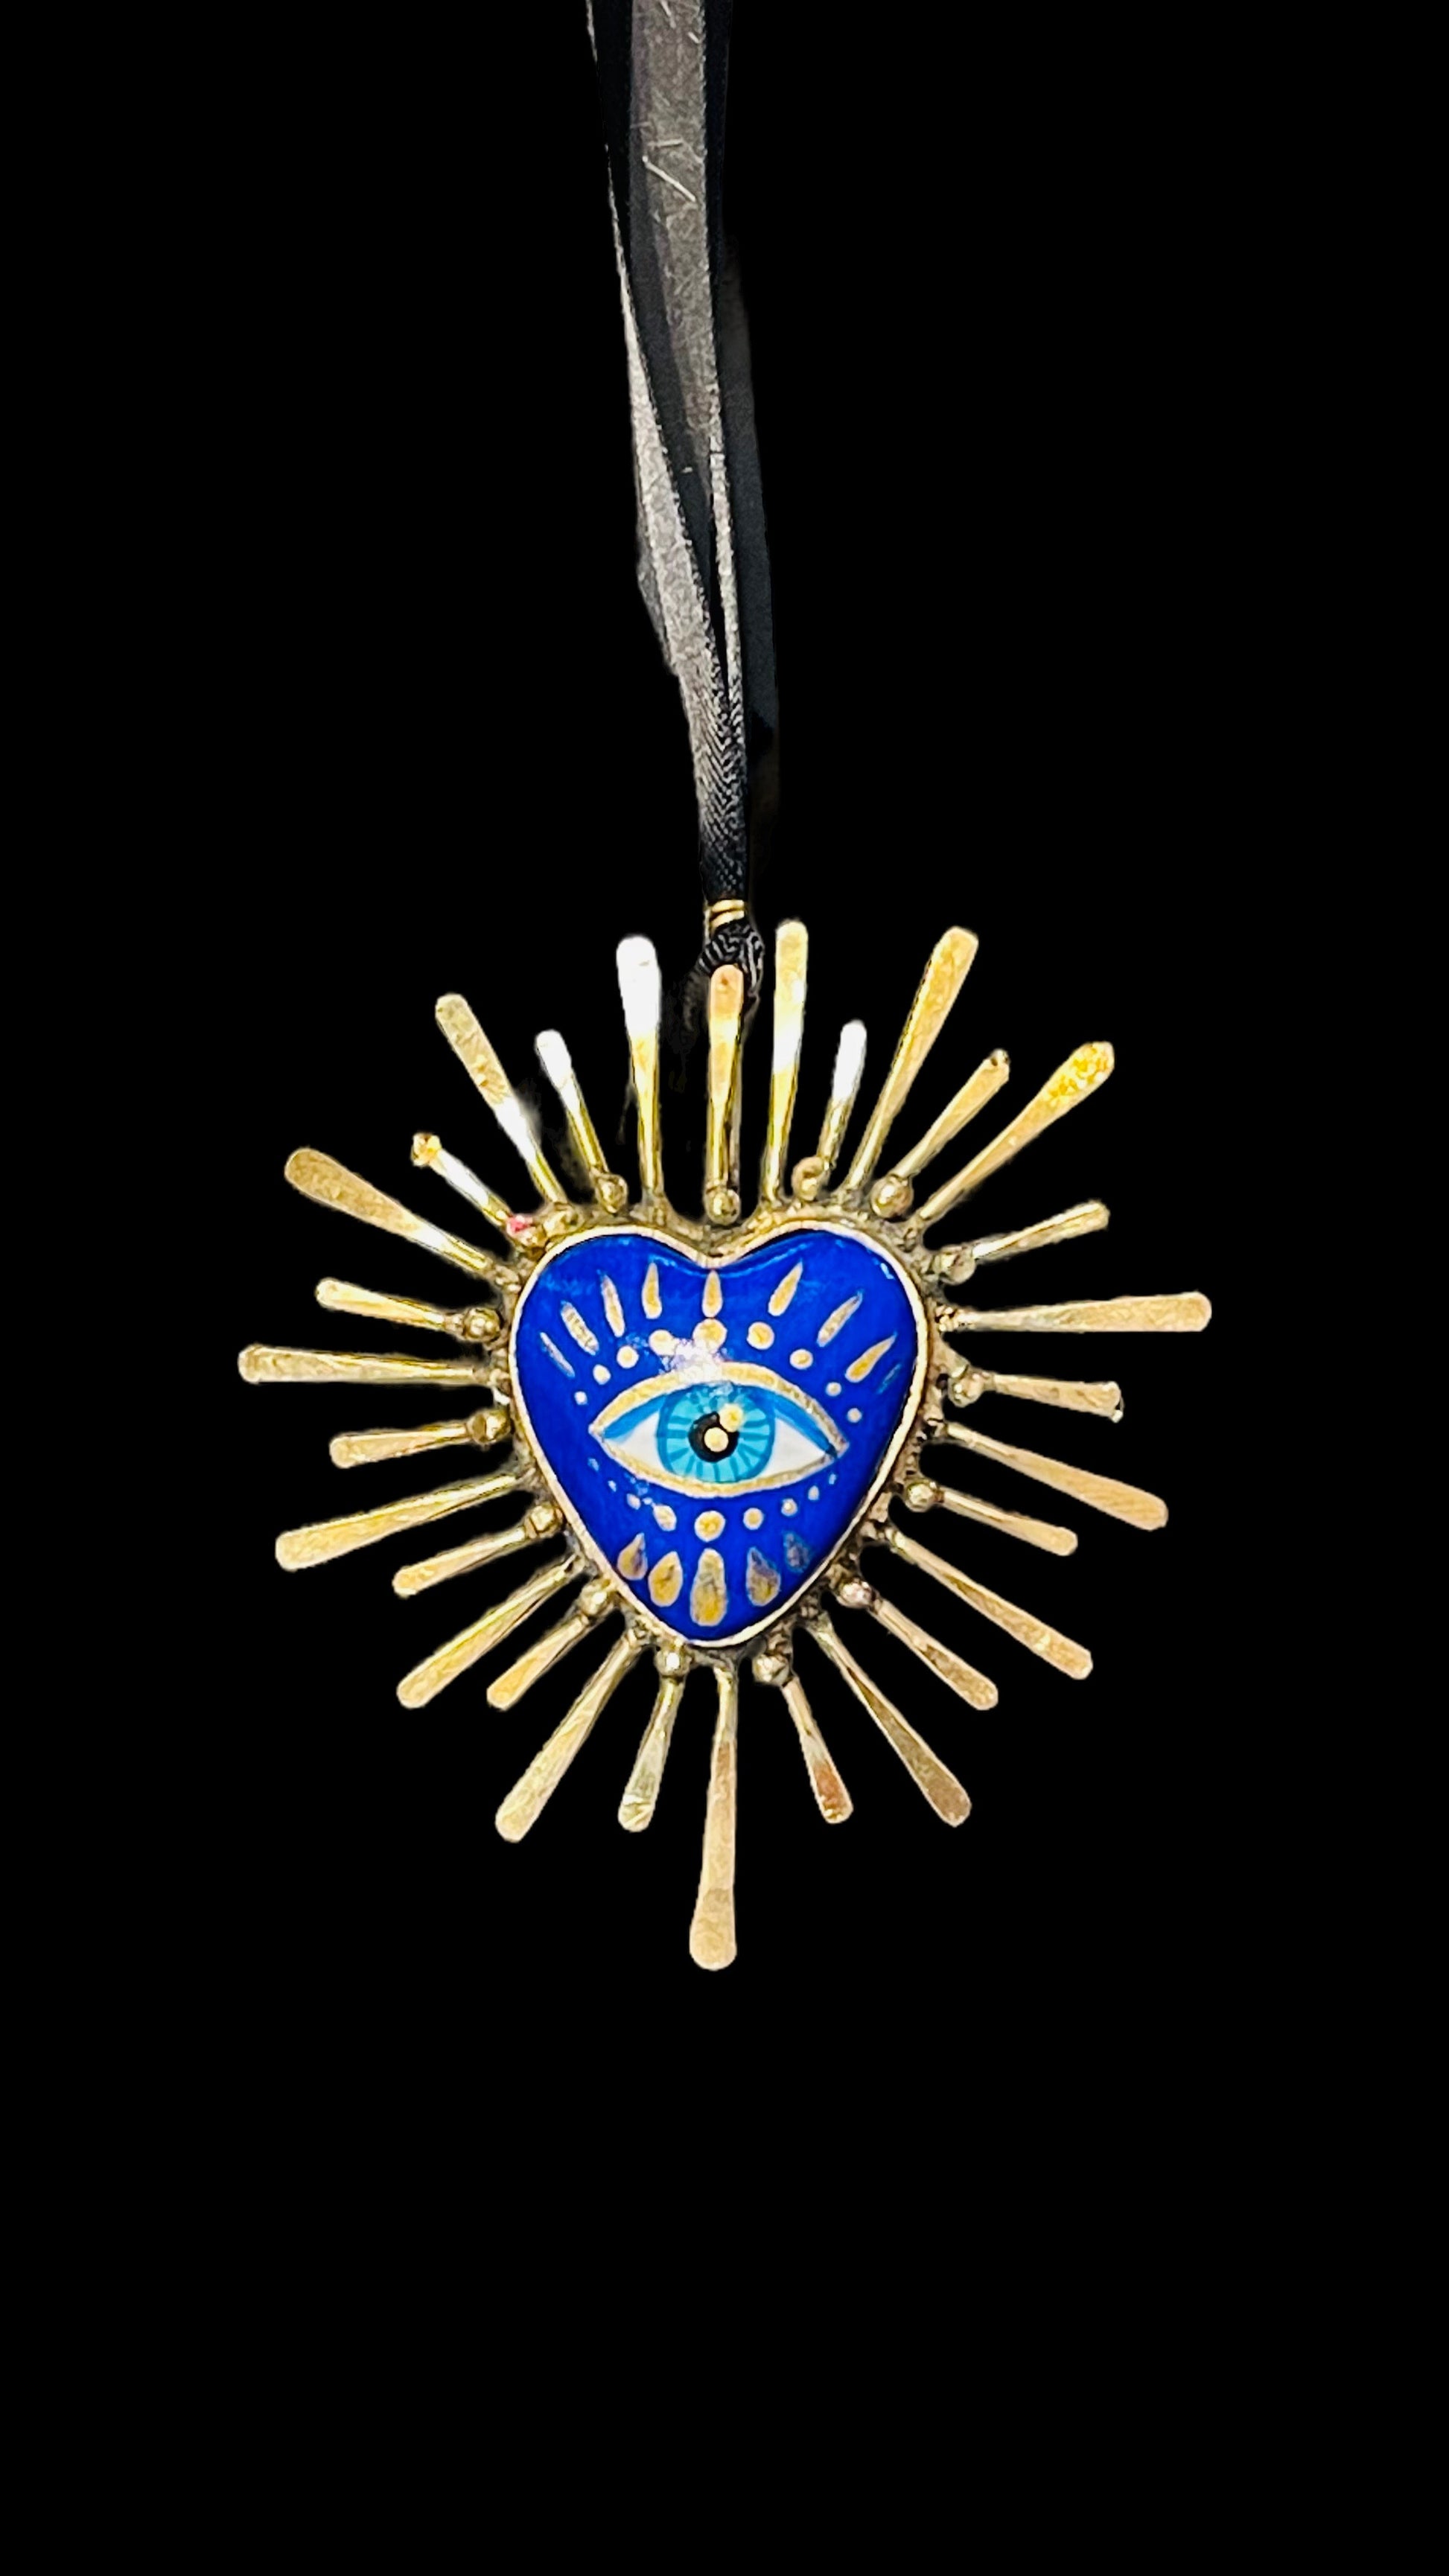 Handmade blue and gold multicultural necklace with painted eye in the center.